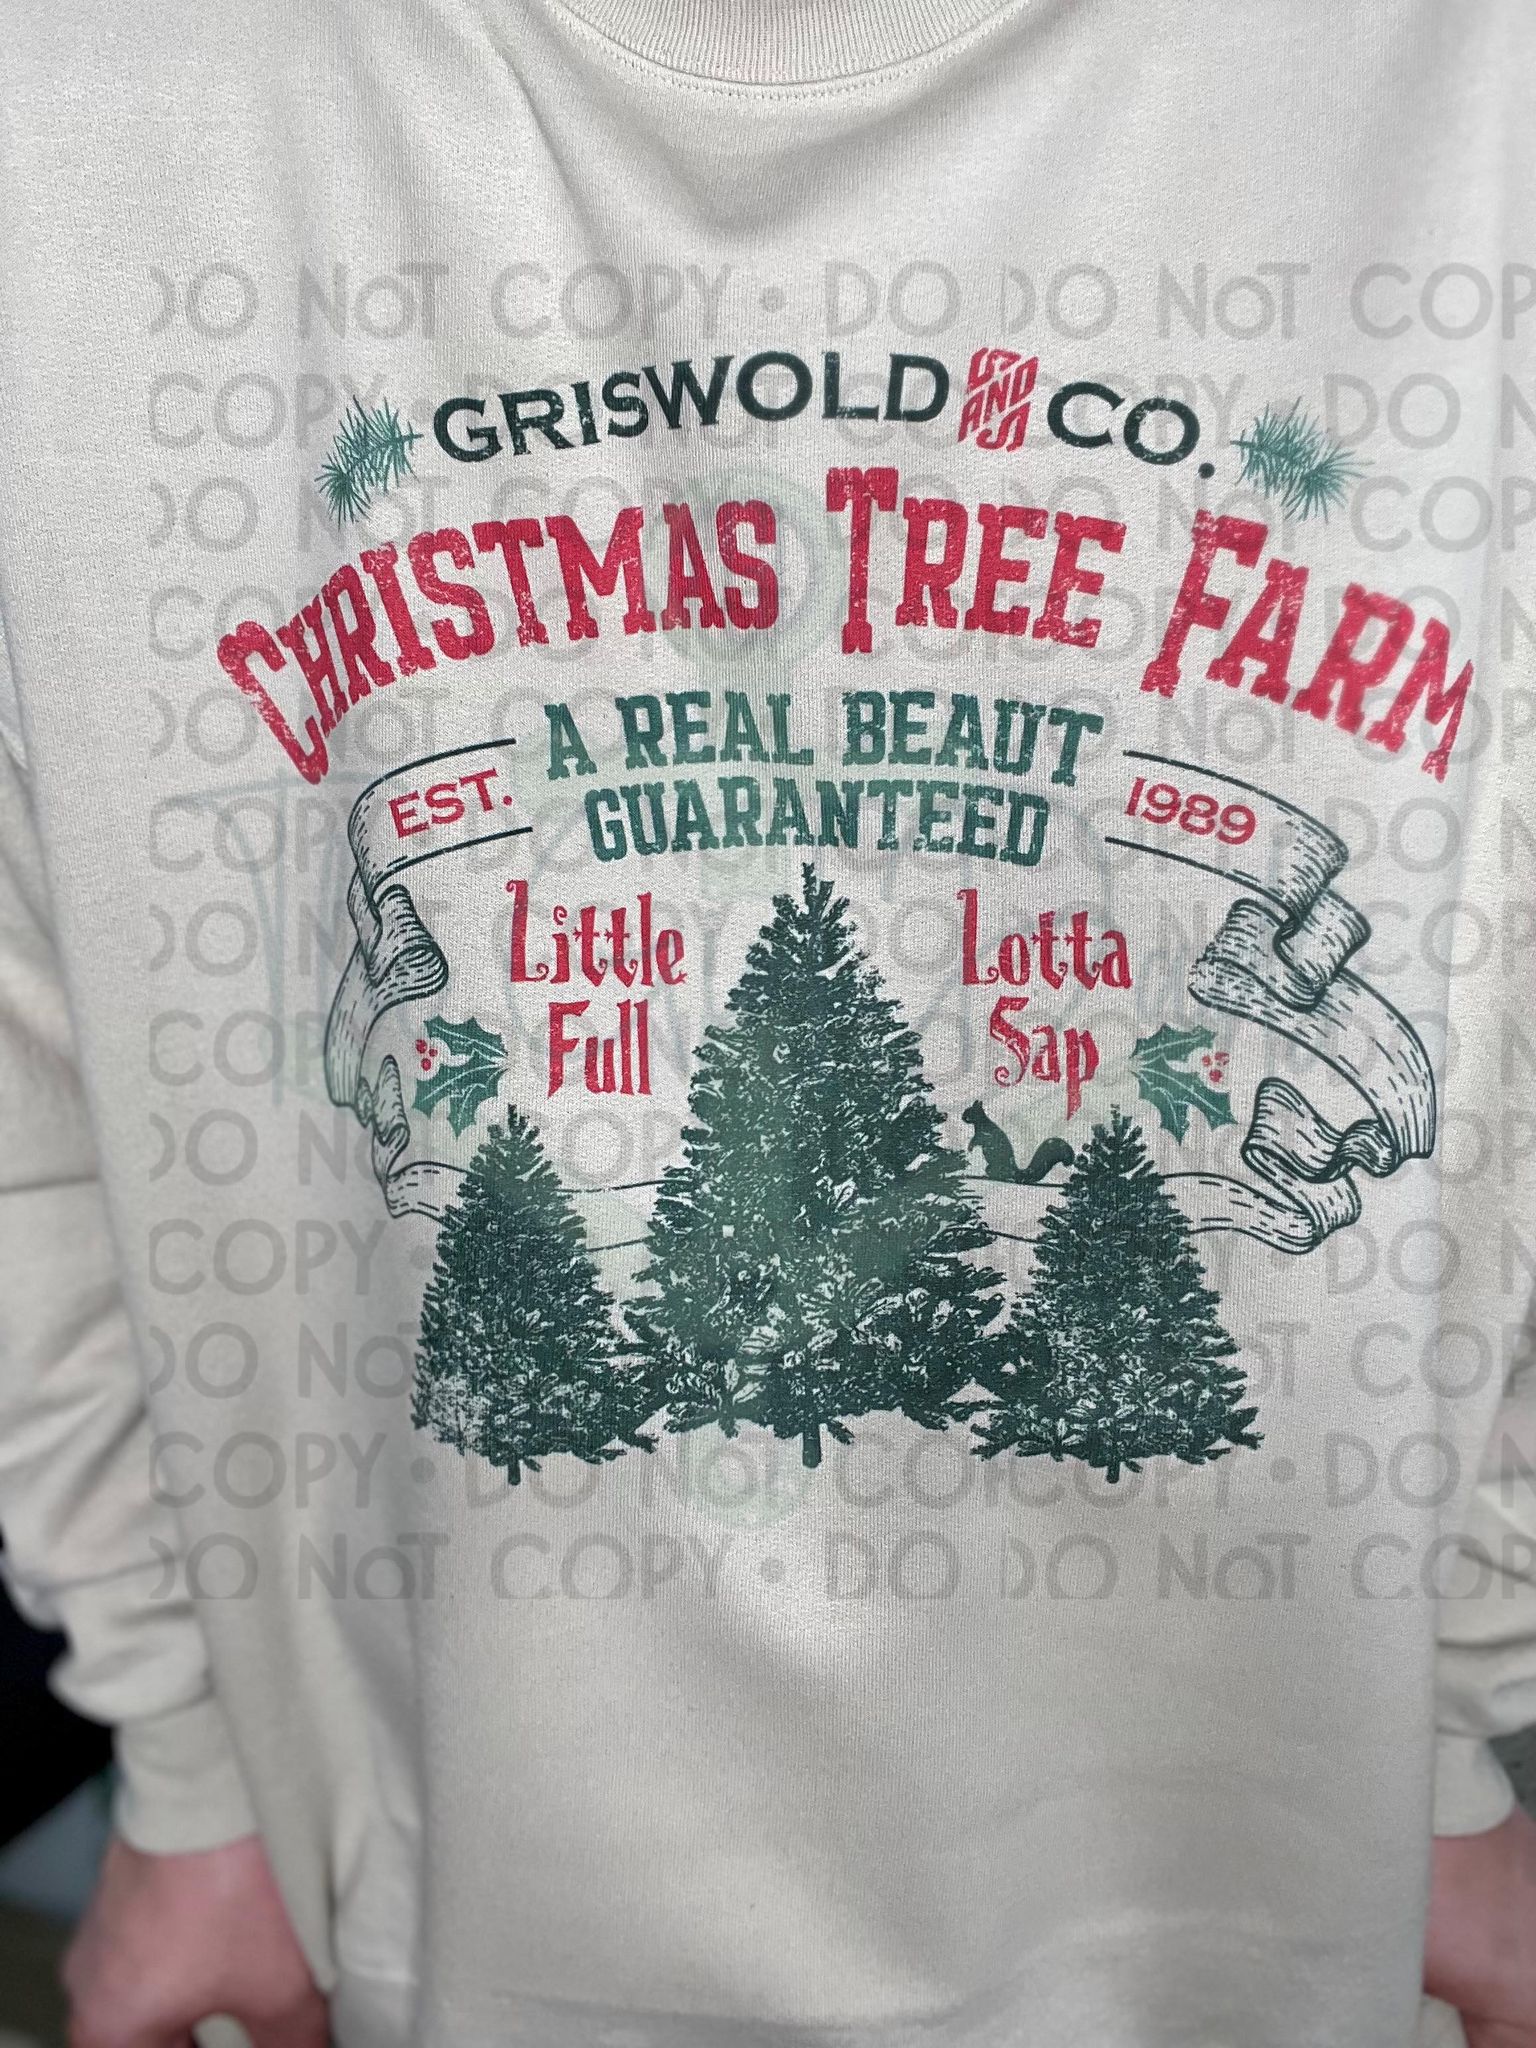 Griswold Co. Christmas Tree Farm Top Design